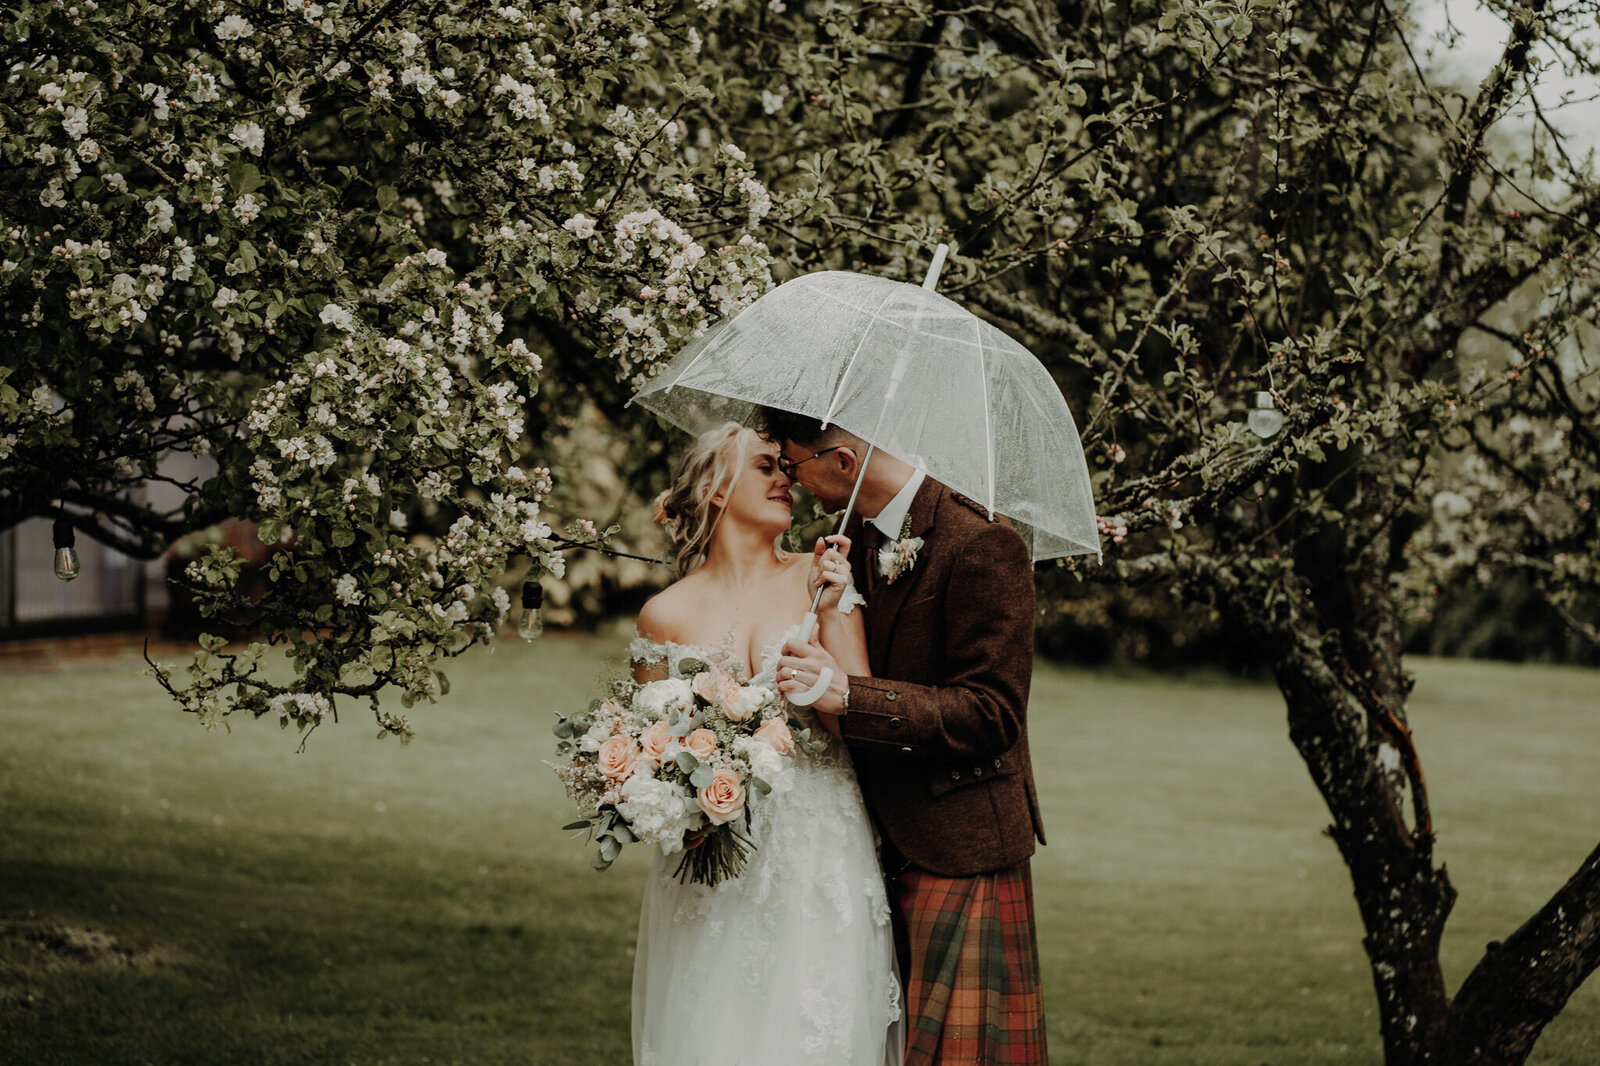 bride and groom kissing under an umbrella with grass lawn and trees in background fun aberdeen wedding photography